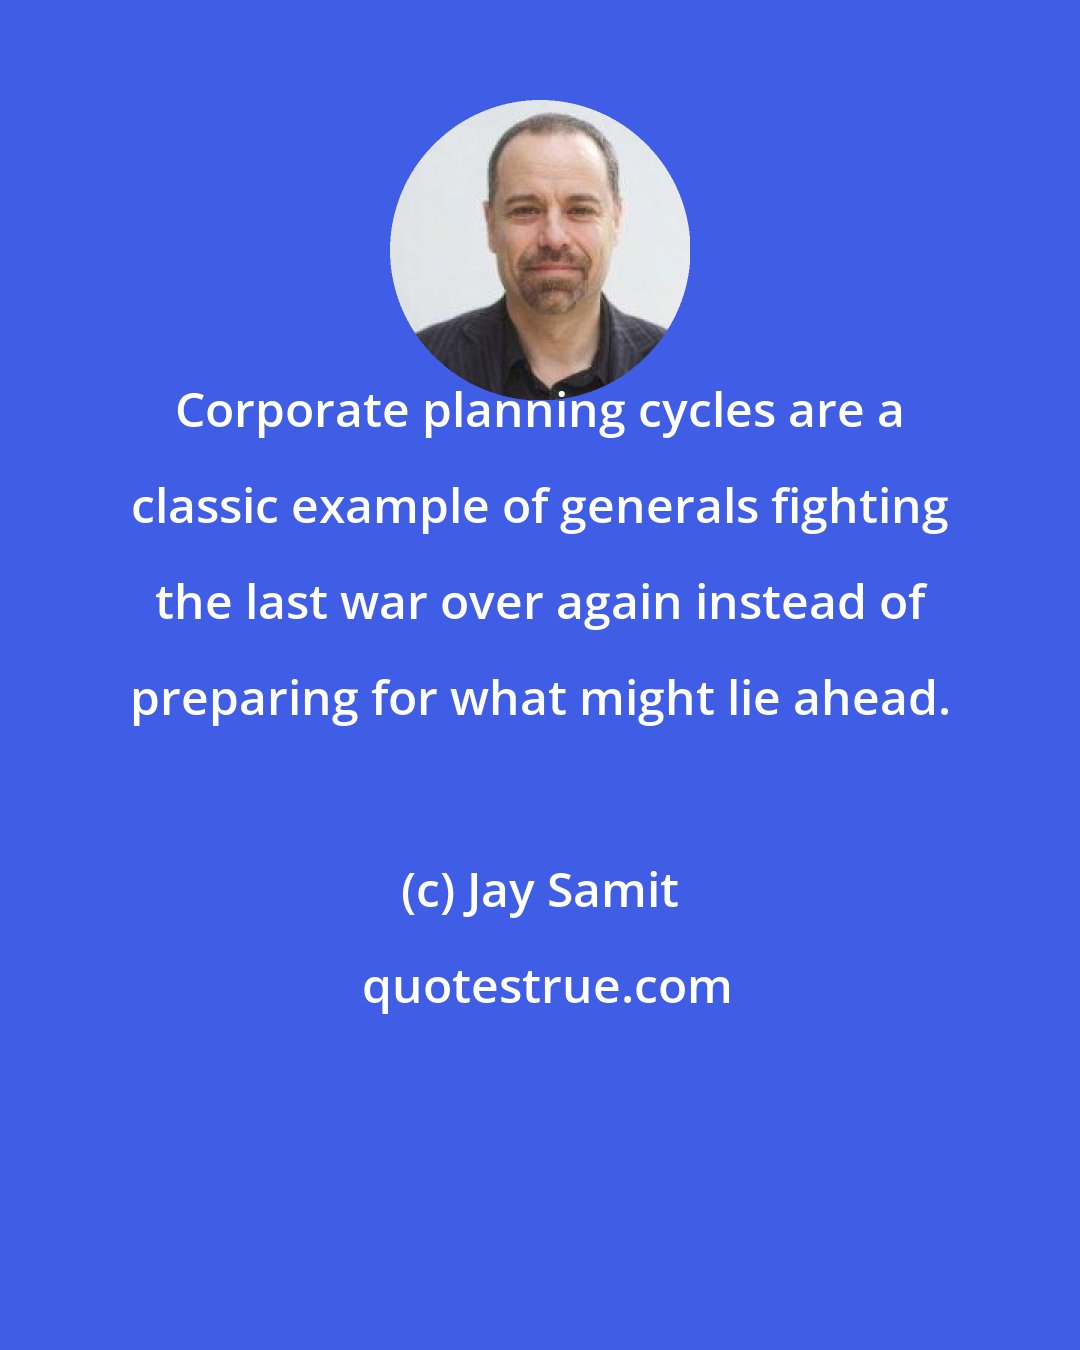 Jay Samit: Corporate planning cycles are a classic example of generals fighting the last war over again instead of preparing for what might lie ahead.